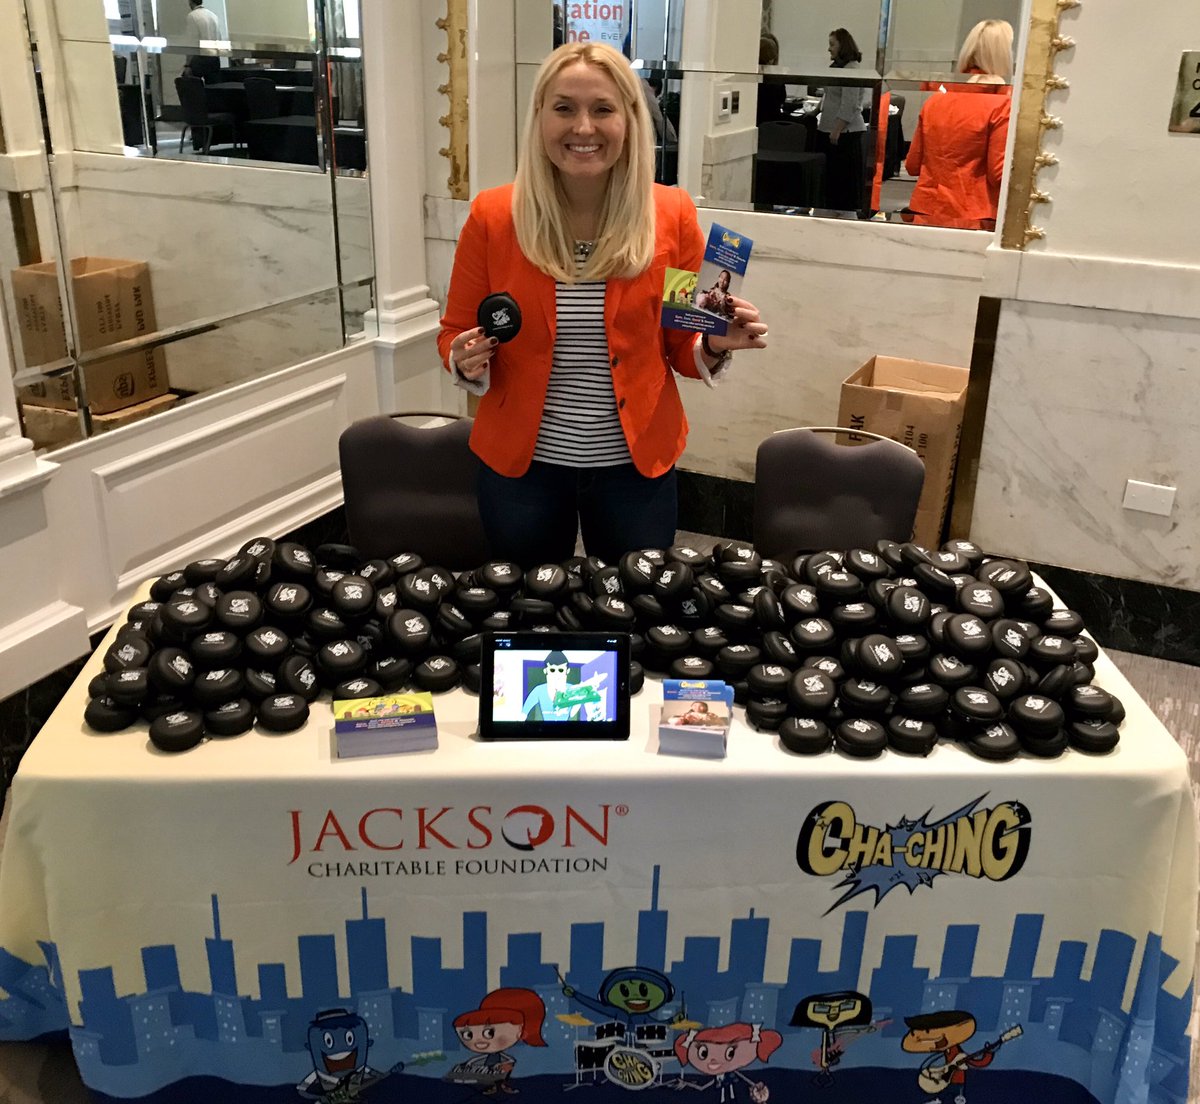 All set up to meet the #finlit #educators at this year’s @NatlJumpStart #JSNEC19! #ChaChing #MoneySmartKids @JacksonFdn @DiscoveryEd